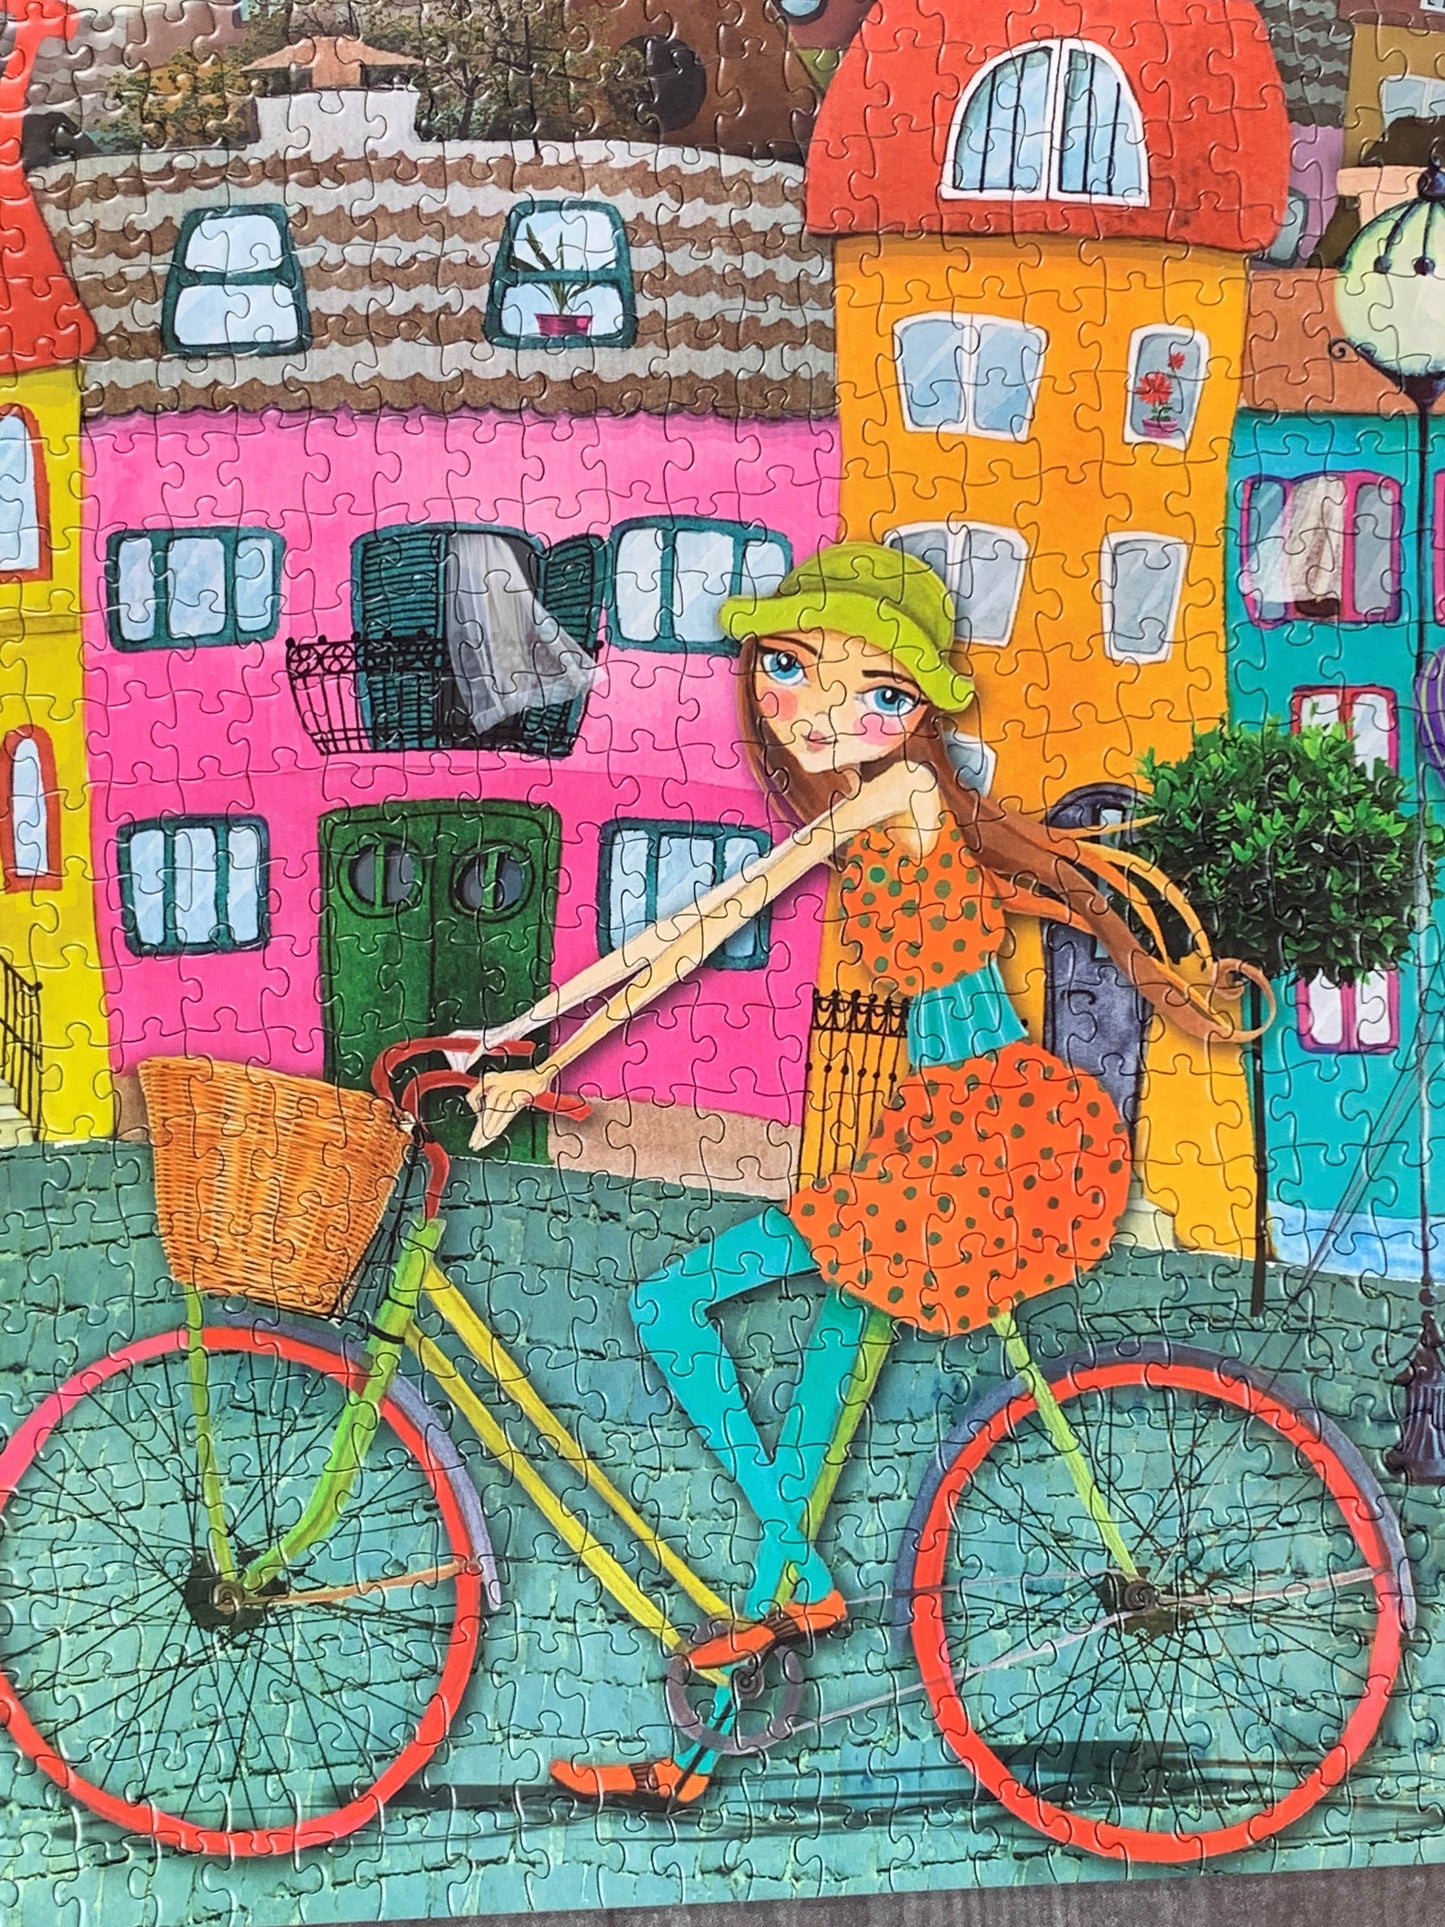 Playful Pastimes Jigsaw Puzzle Out for a Ride | 1000 pieces Puzzle